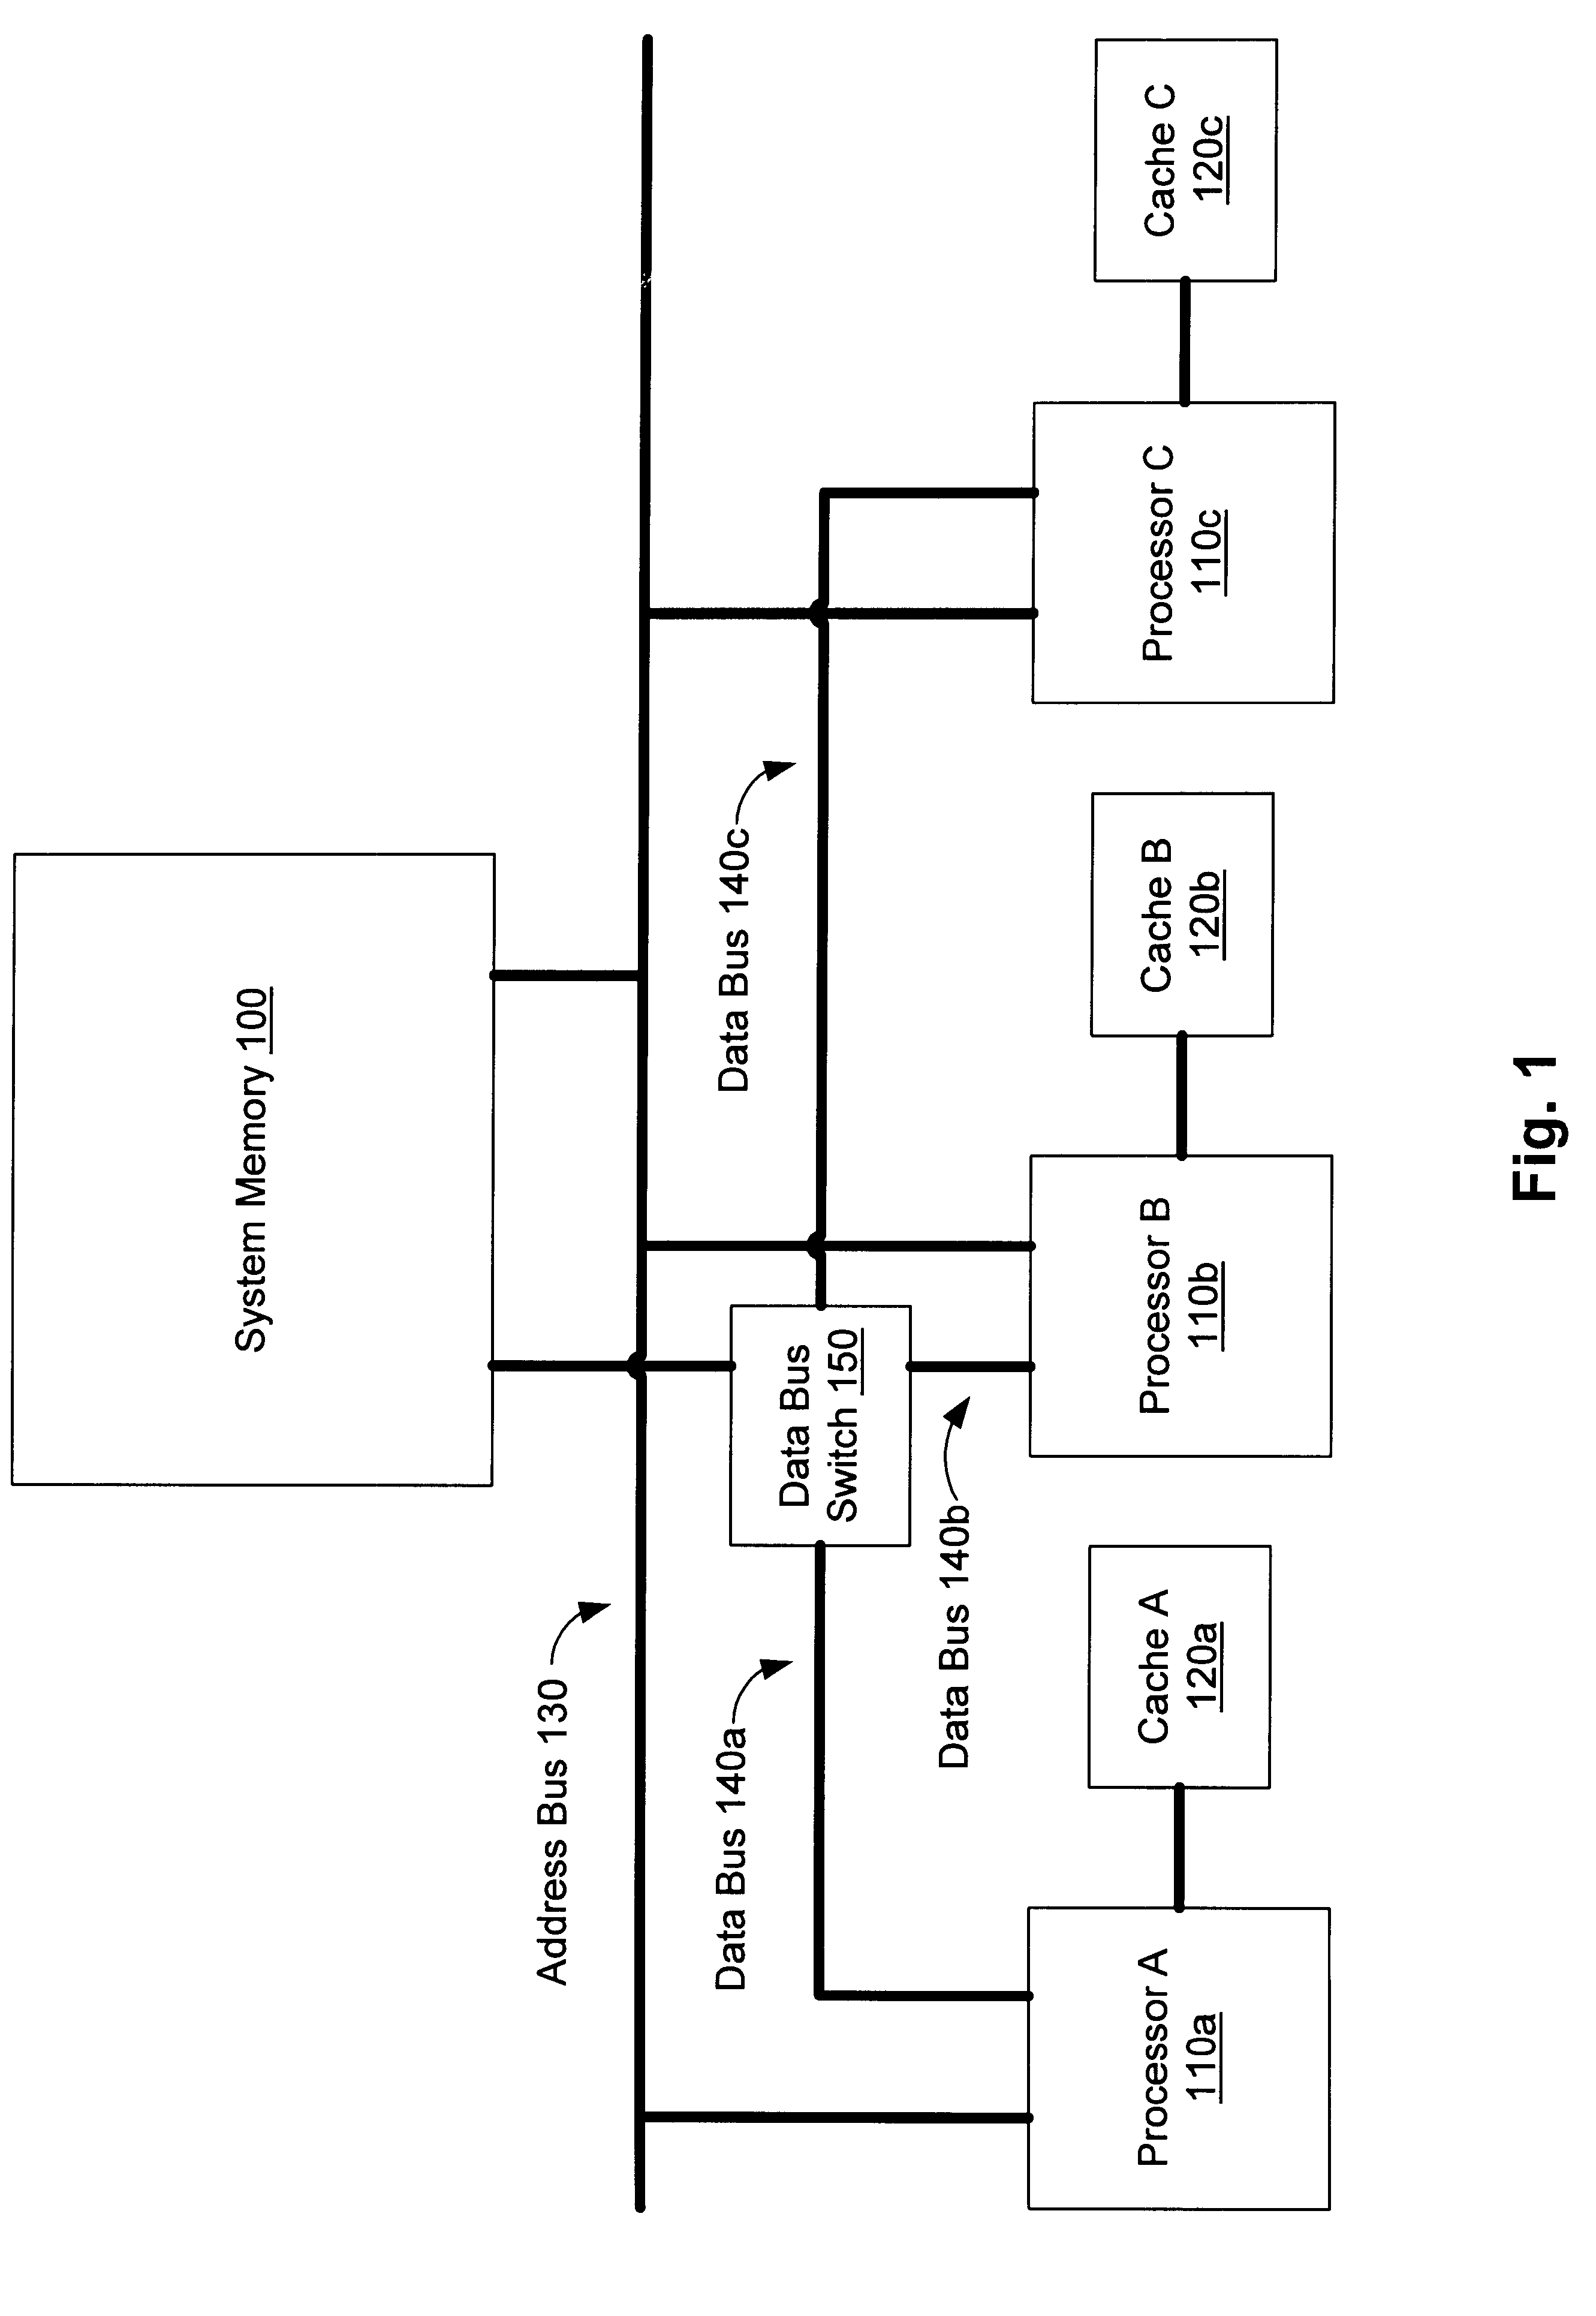 Mechanism for reordering transactions in computer systems with snoop-based cache consistency protocols